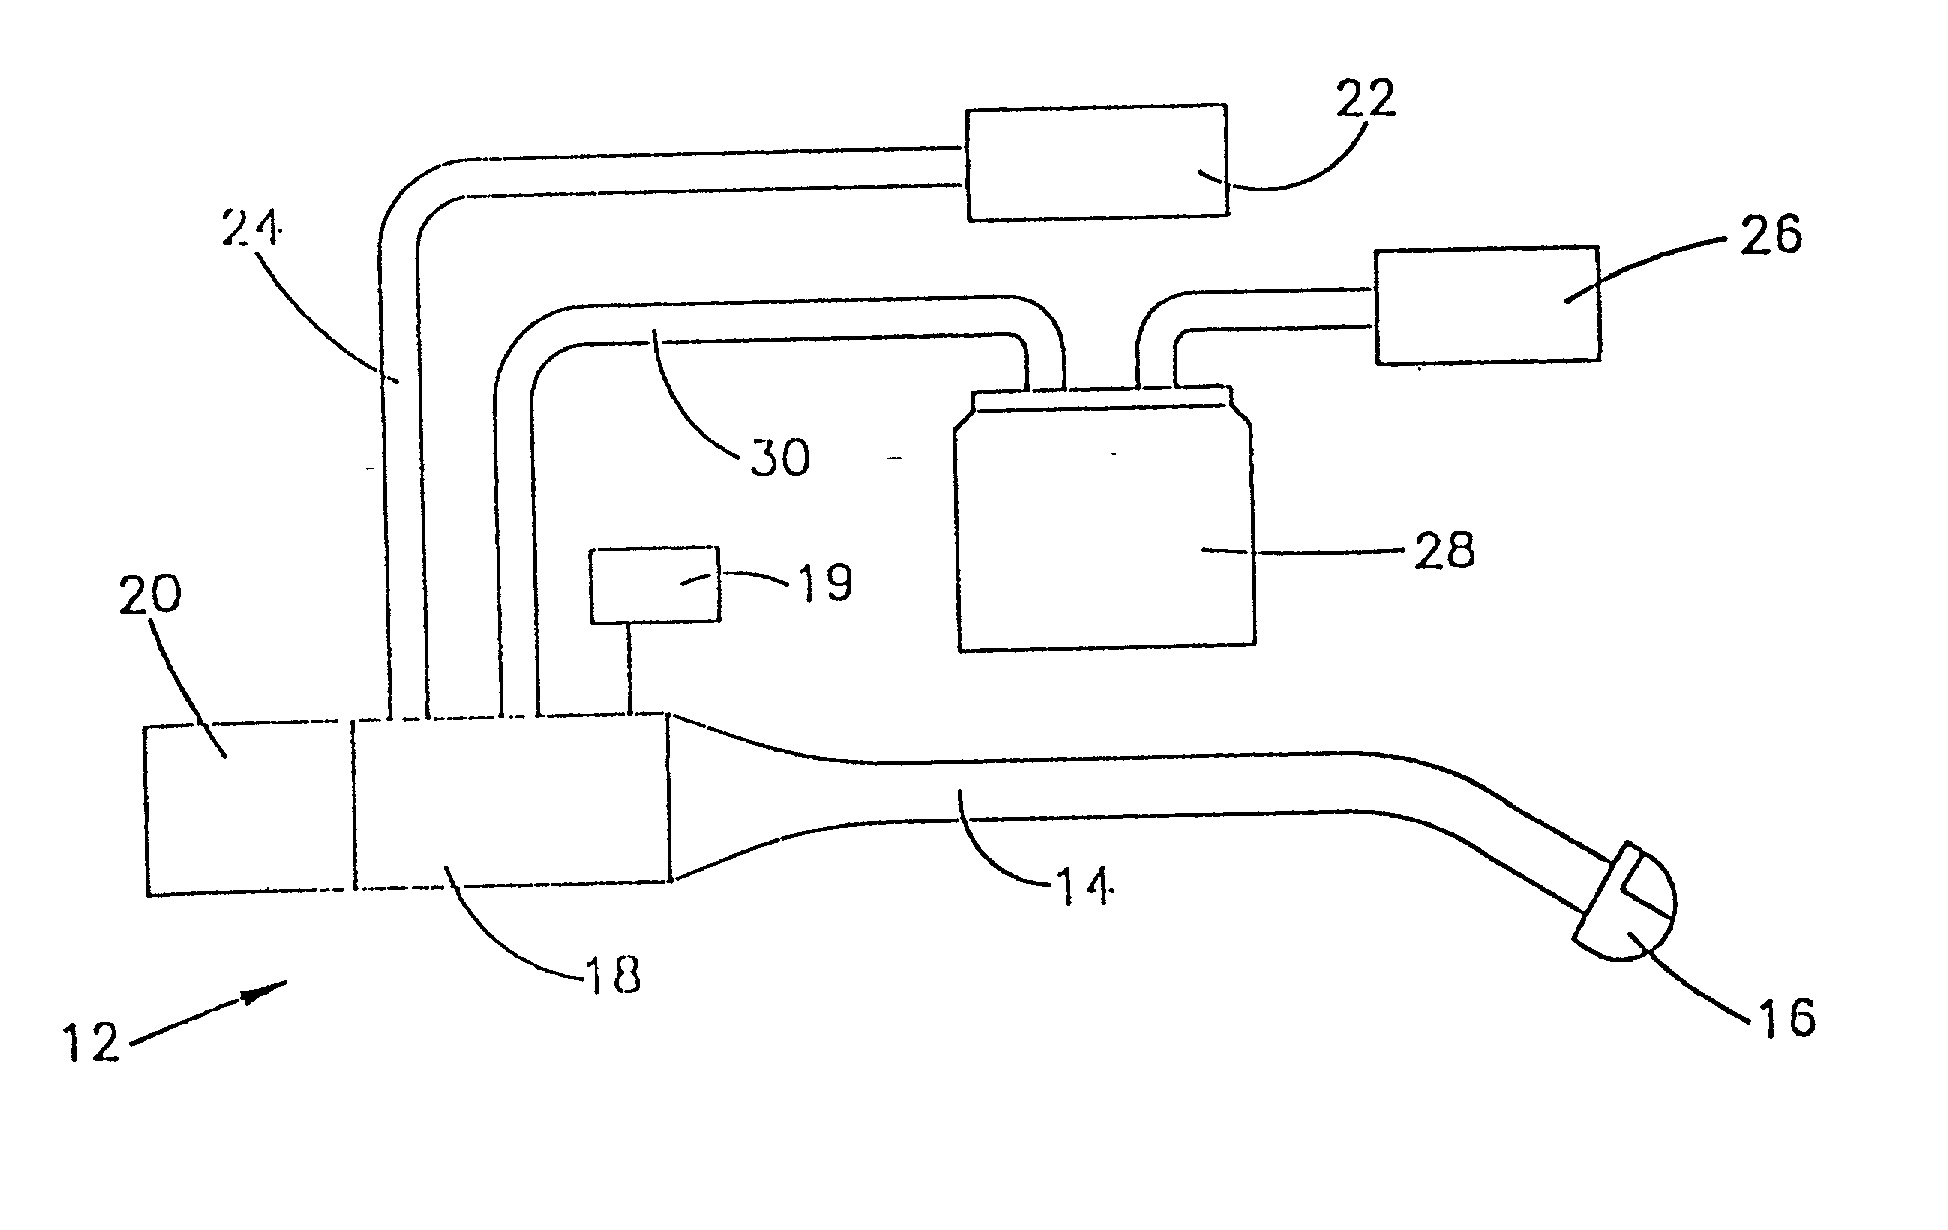 Apparatus and method for tissue removal